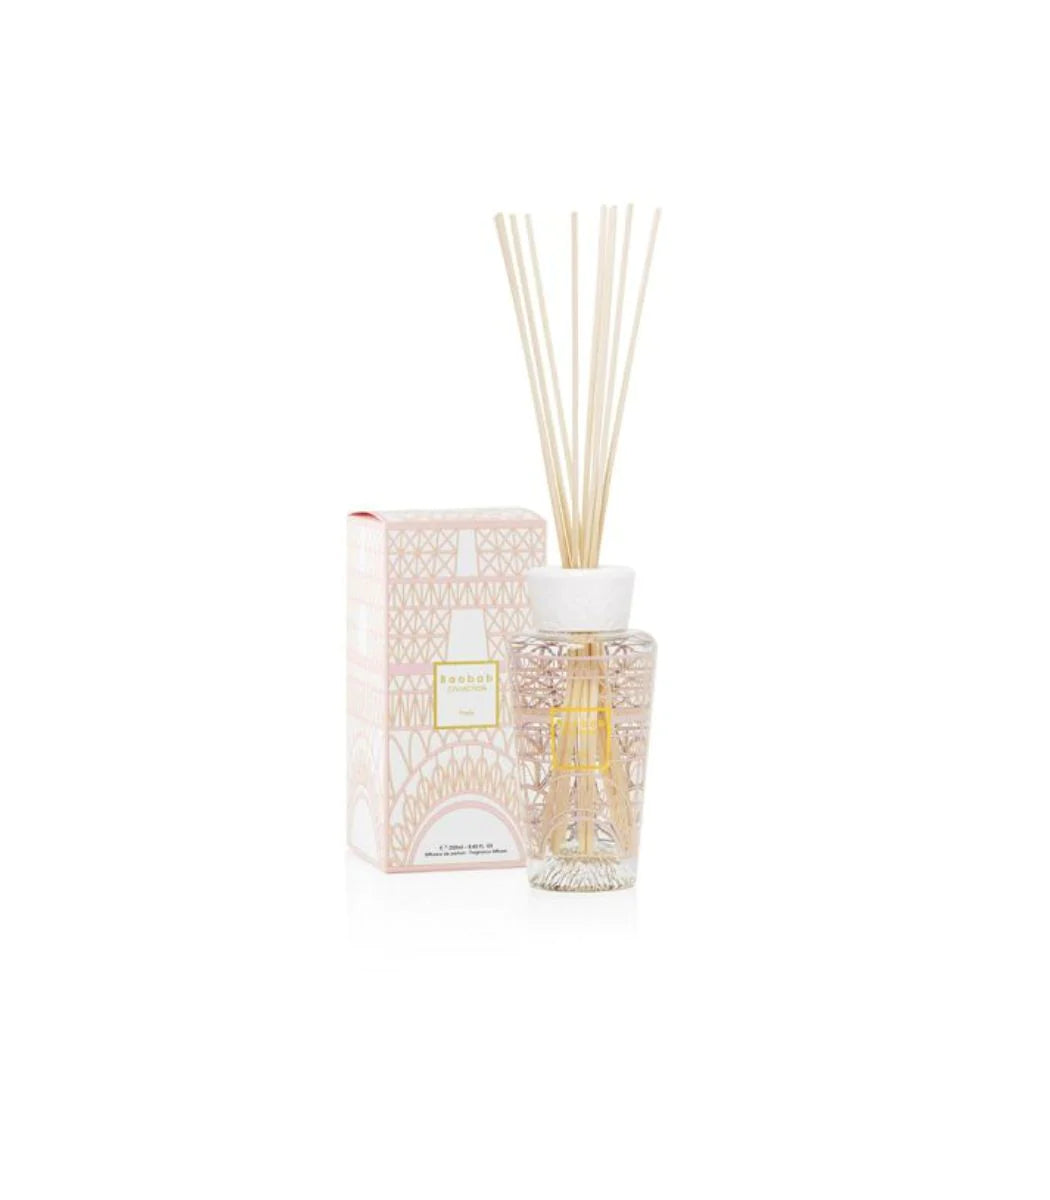 MY FIRST BAOBAB - BABY COLLECTION CANDLE&DIFFUSOR